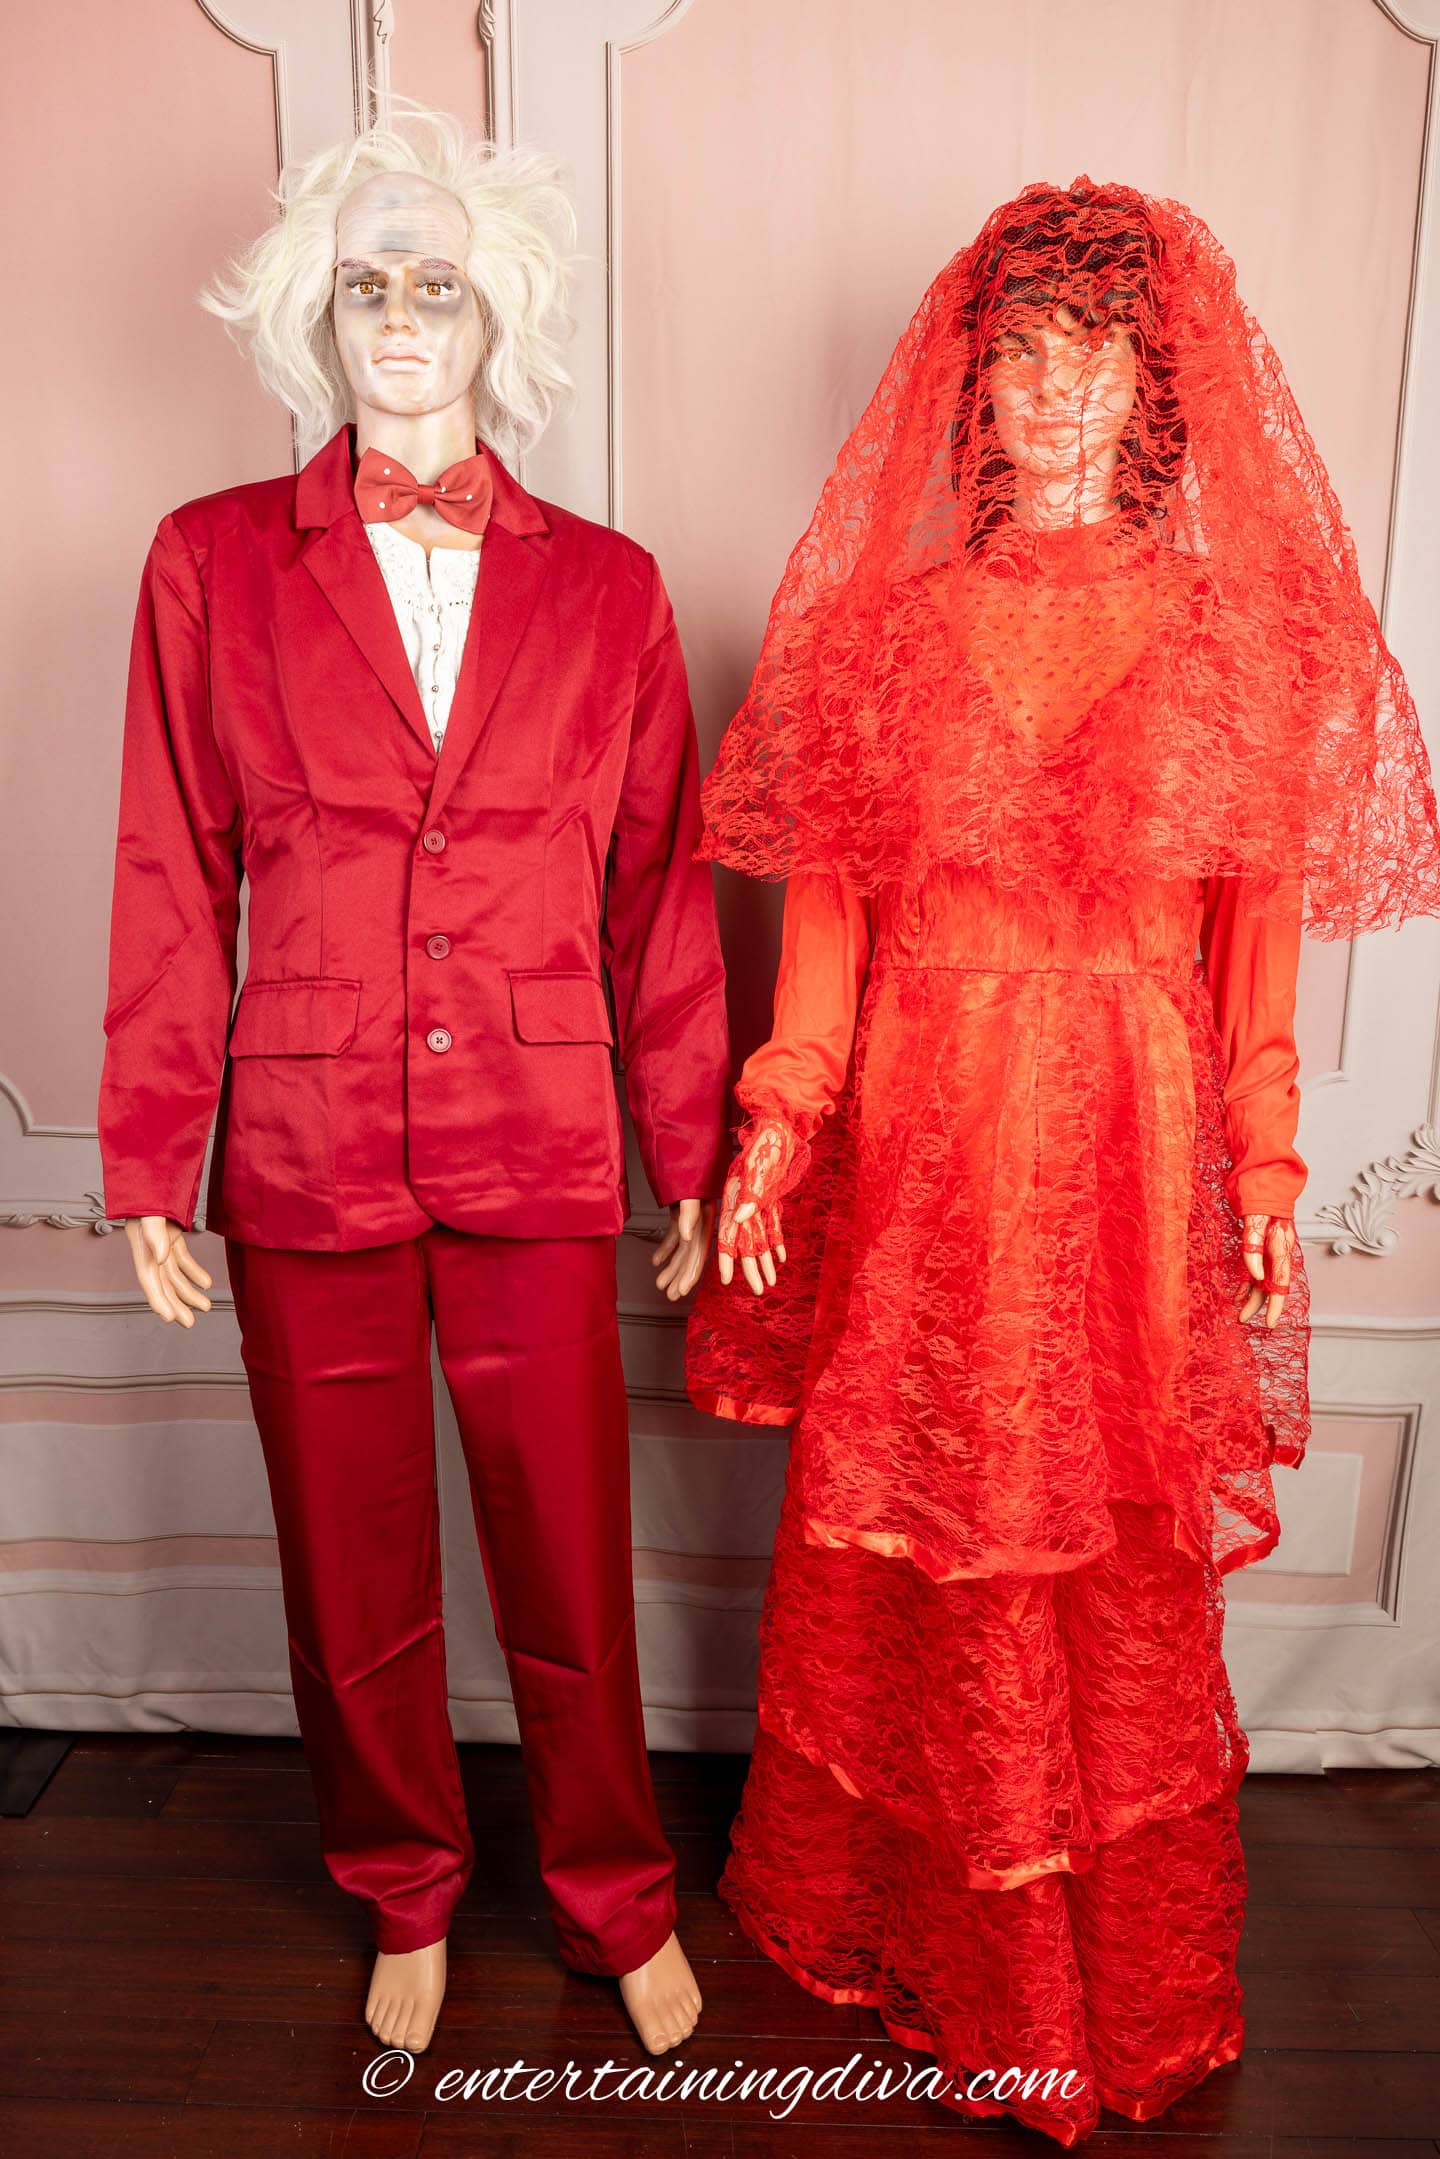 A couple of mannequins dressed as Beetlejuice and Lydia Deetz in their wedding outfits